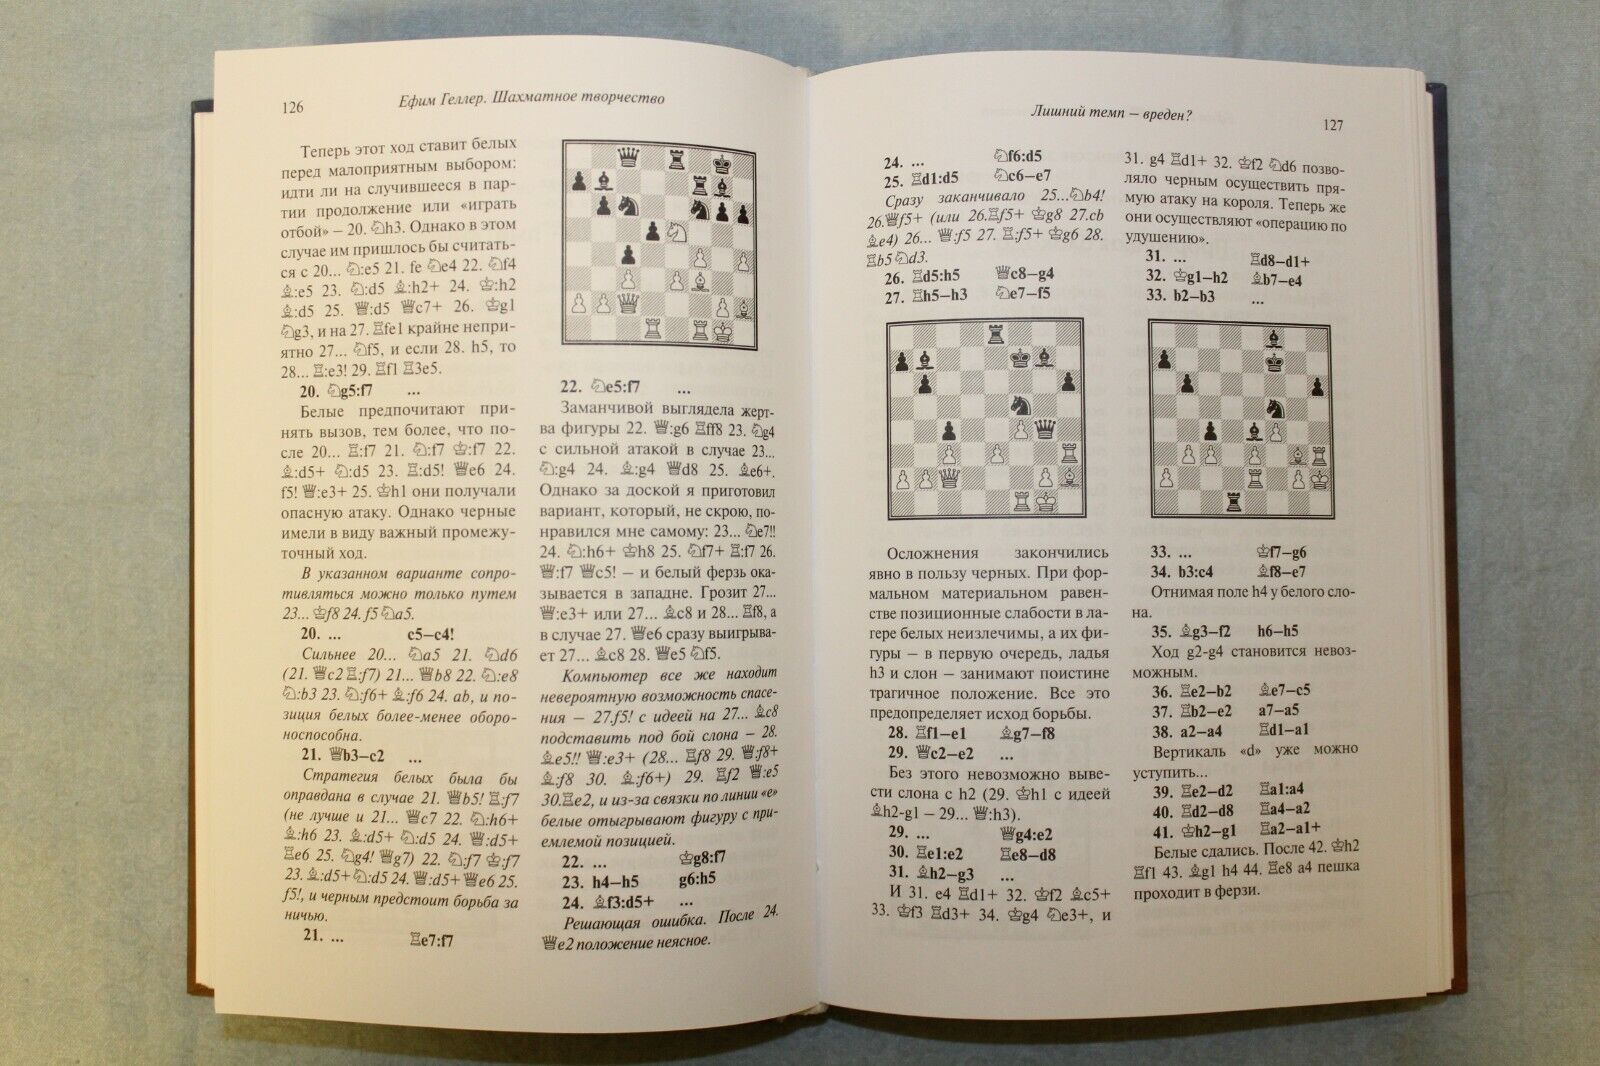 11148.Chess Creativity. Yefim Geller. Complete games collection with comments. 2019